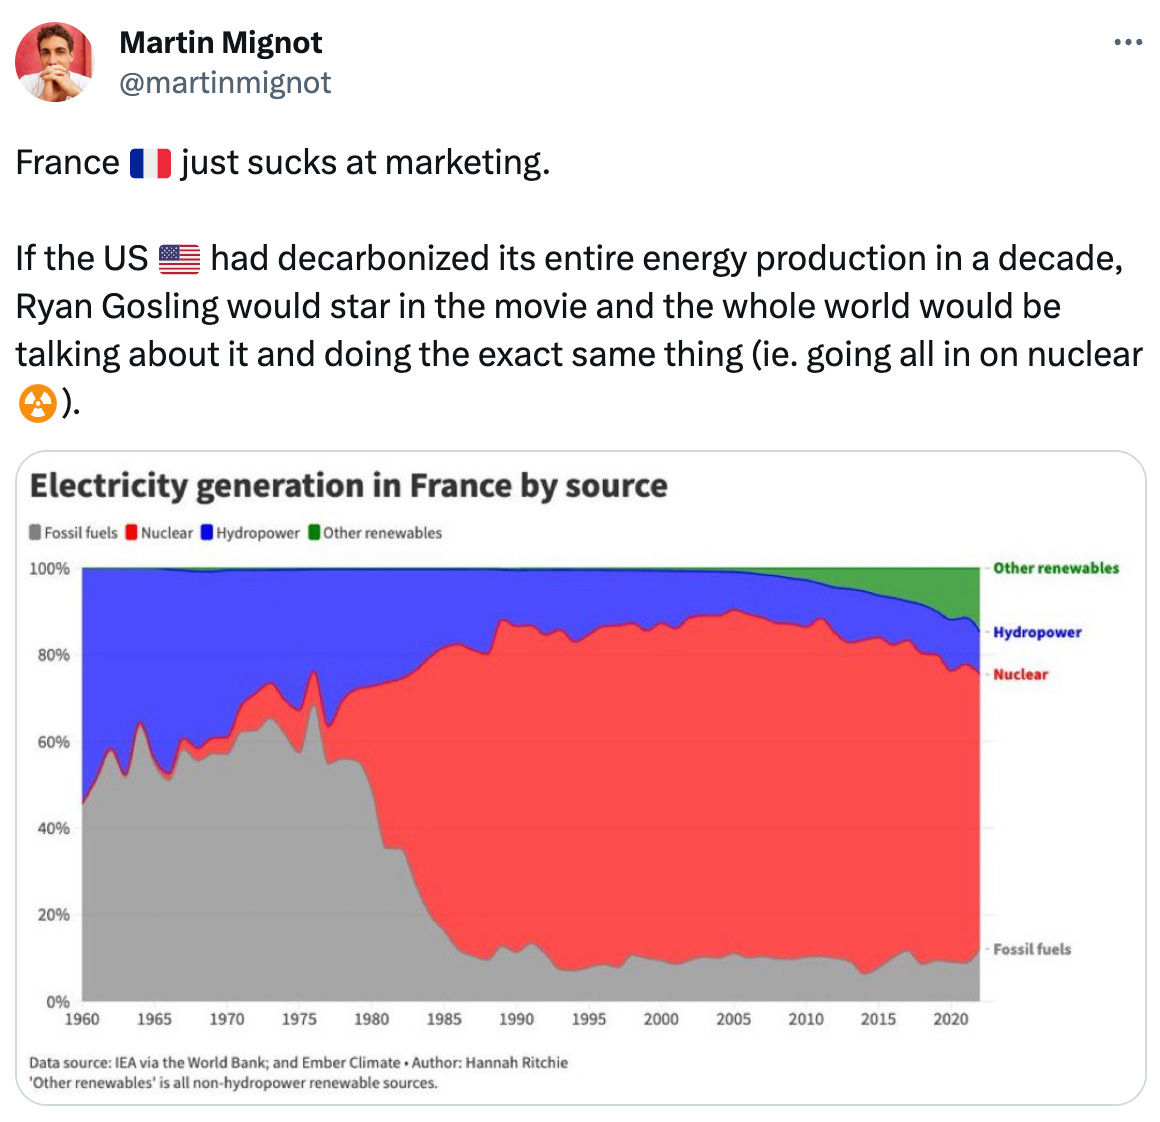  Martin Mignot @martinmignot France 🇫🇷 just sucks at marketing.   If the US 🇺🇸 had decarbonized its entire energy production in a decade, Ryan Gosling would star in the movie and the whole world would be talking about it and doing the exact same thing (ie. going all in on nuclear ☢️).